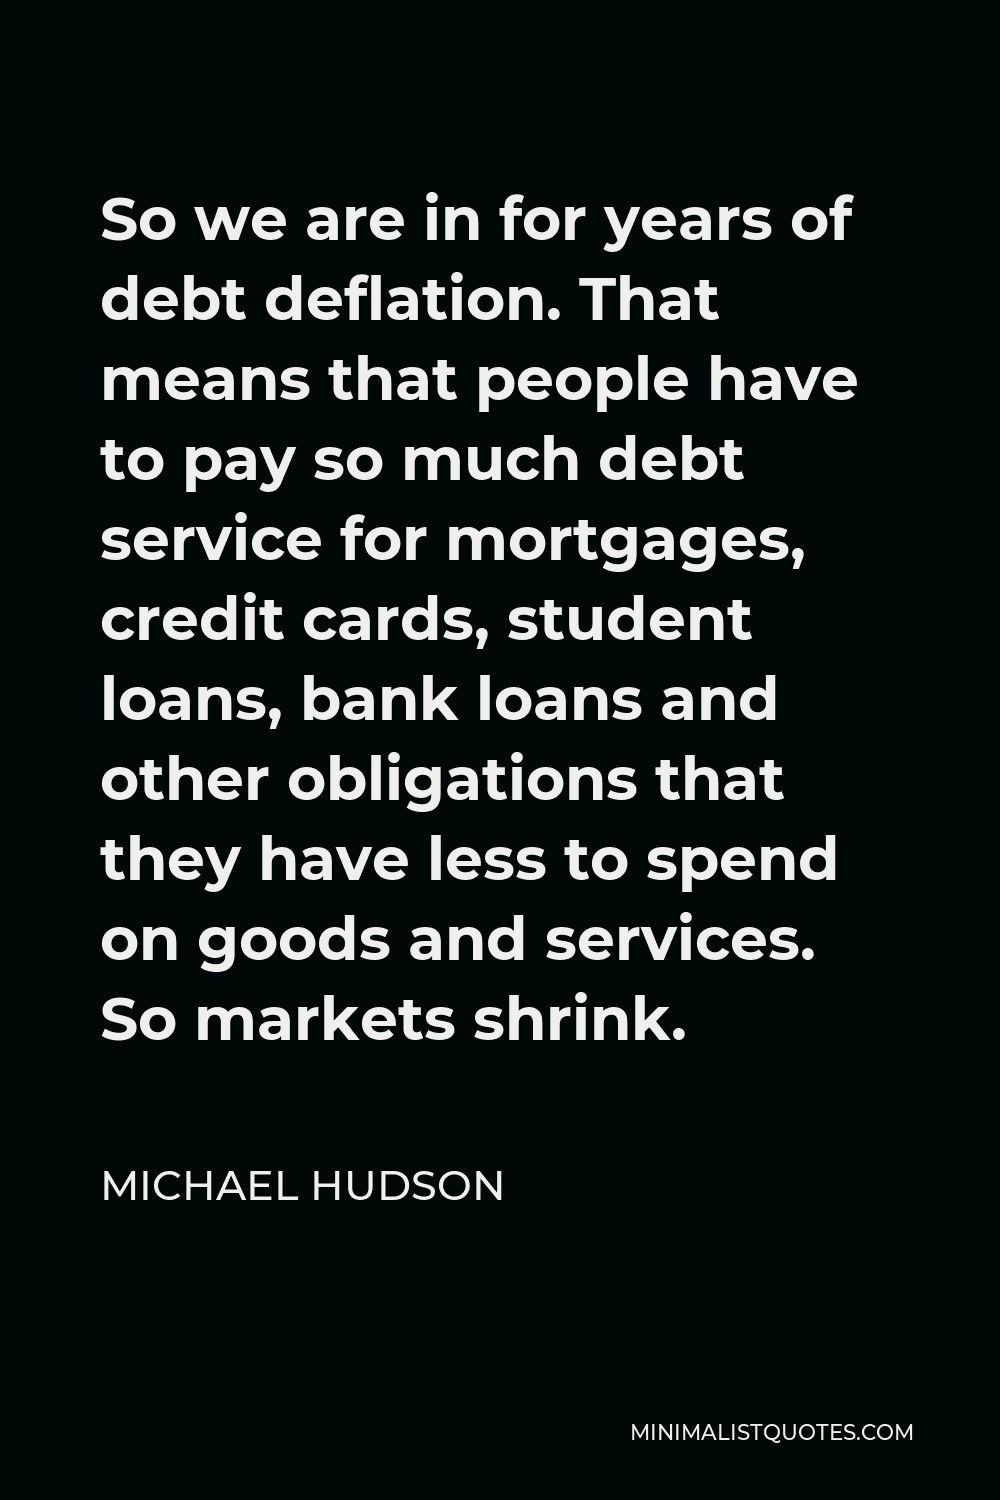 Michael Hudson Quote - So we are in for years of debt deflation. That means that people have to pay so much debt service for mortgages, credit cards, student loans, bank loans and other obligations that they have less to spend on goods and services. So markets shrink.